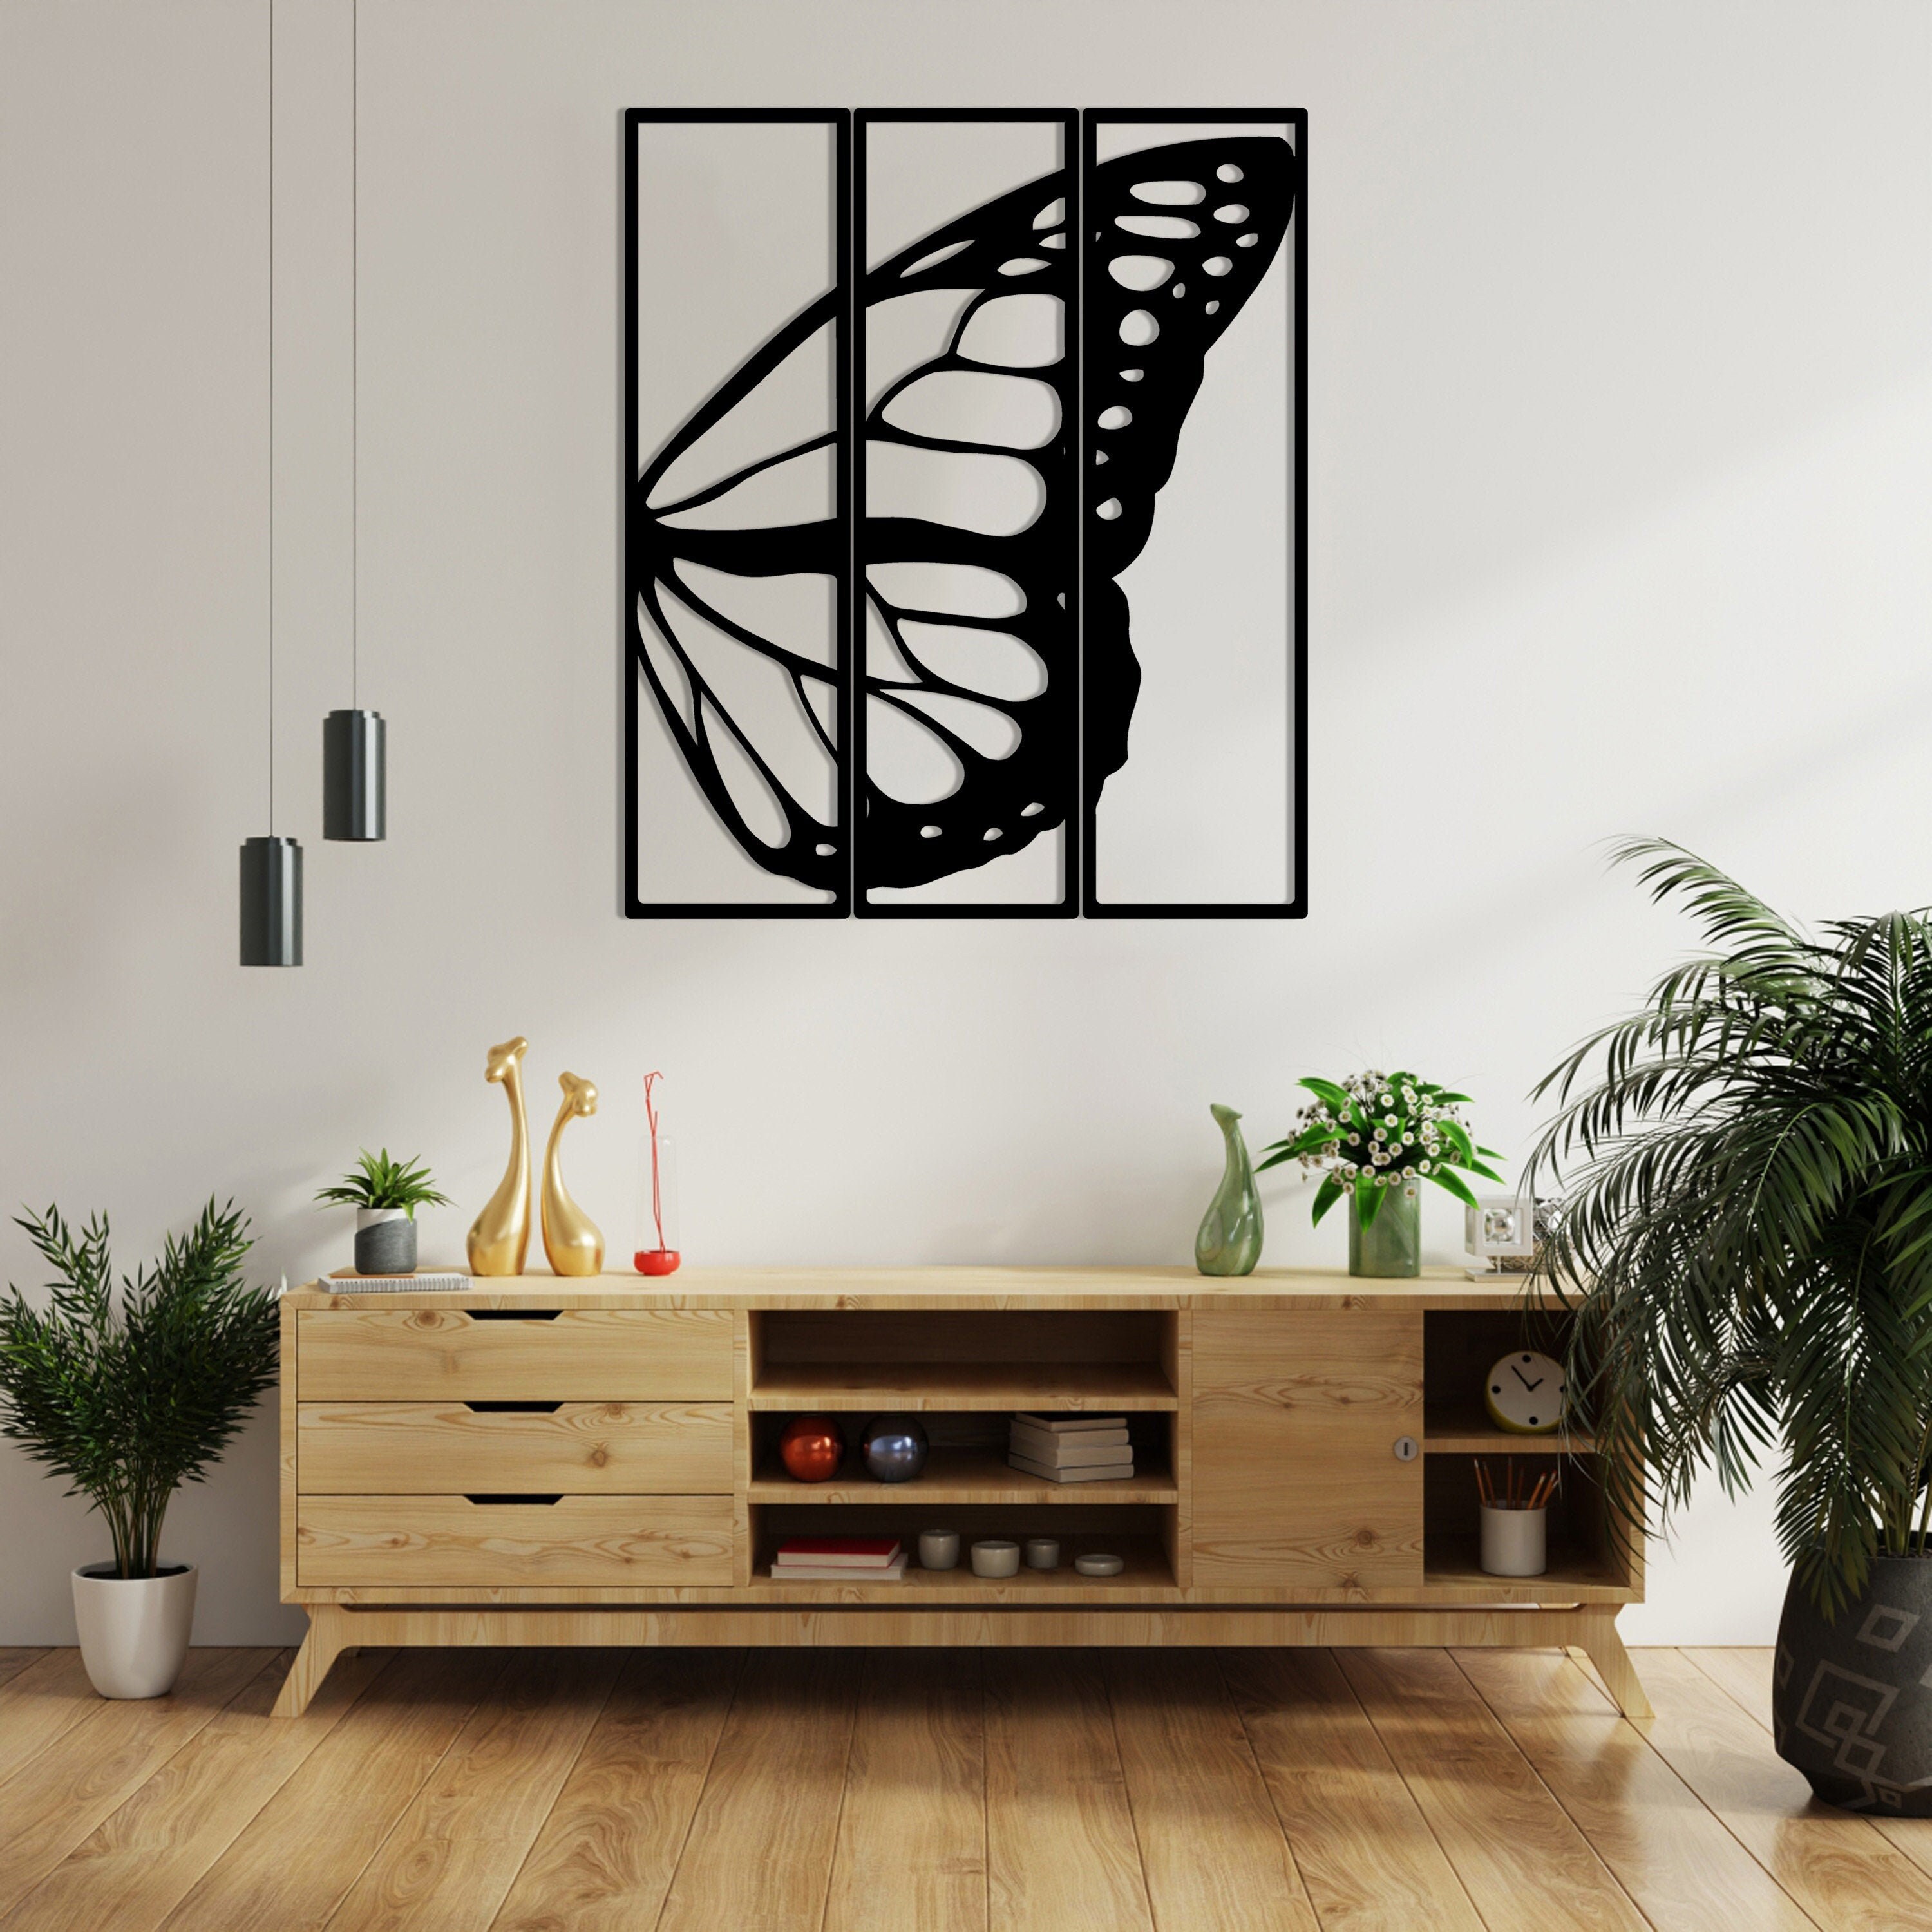 Butterfly Metal Wall Art, Porch Decor, Butterfly Home Living Room Decoration, Hangings